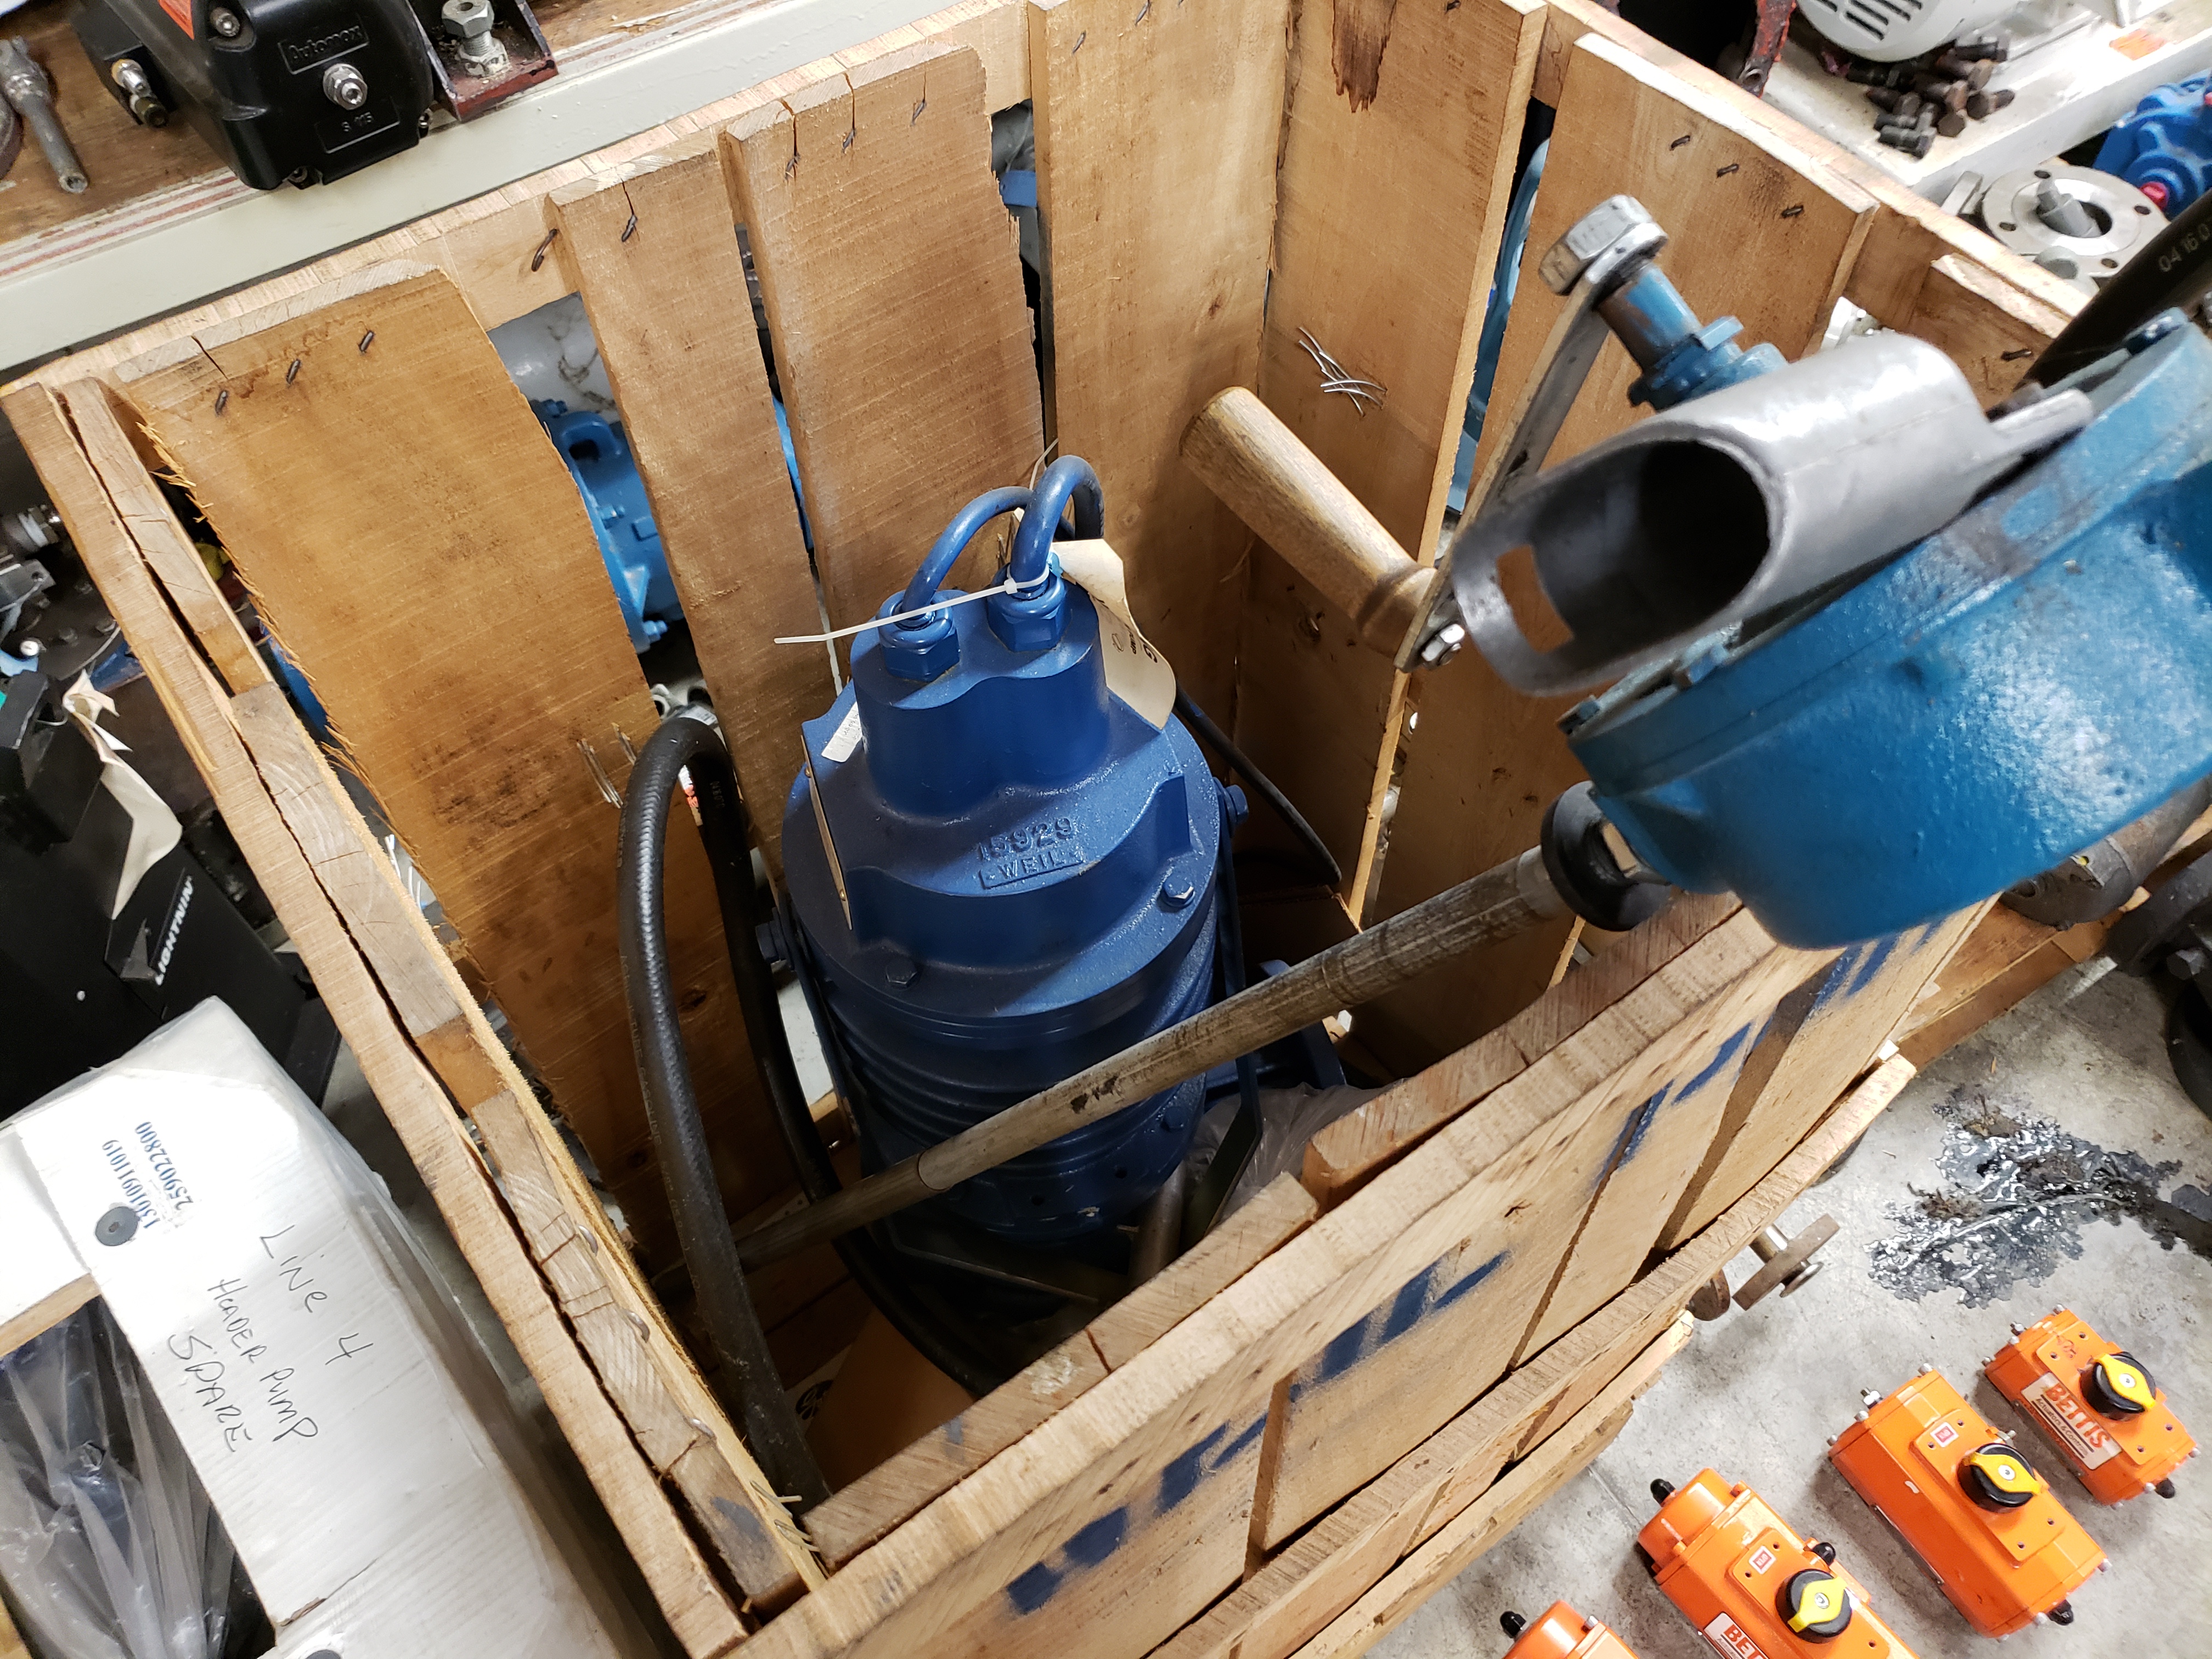 Weil submersible wastewater pump Model: 2515